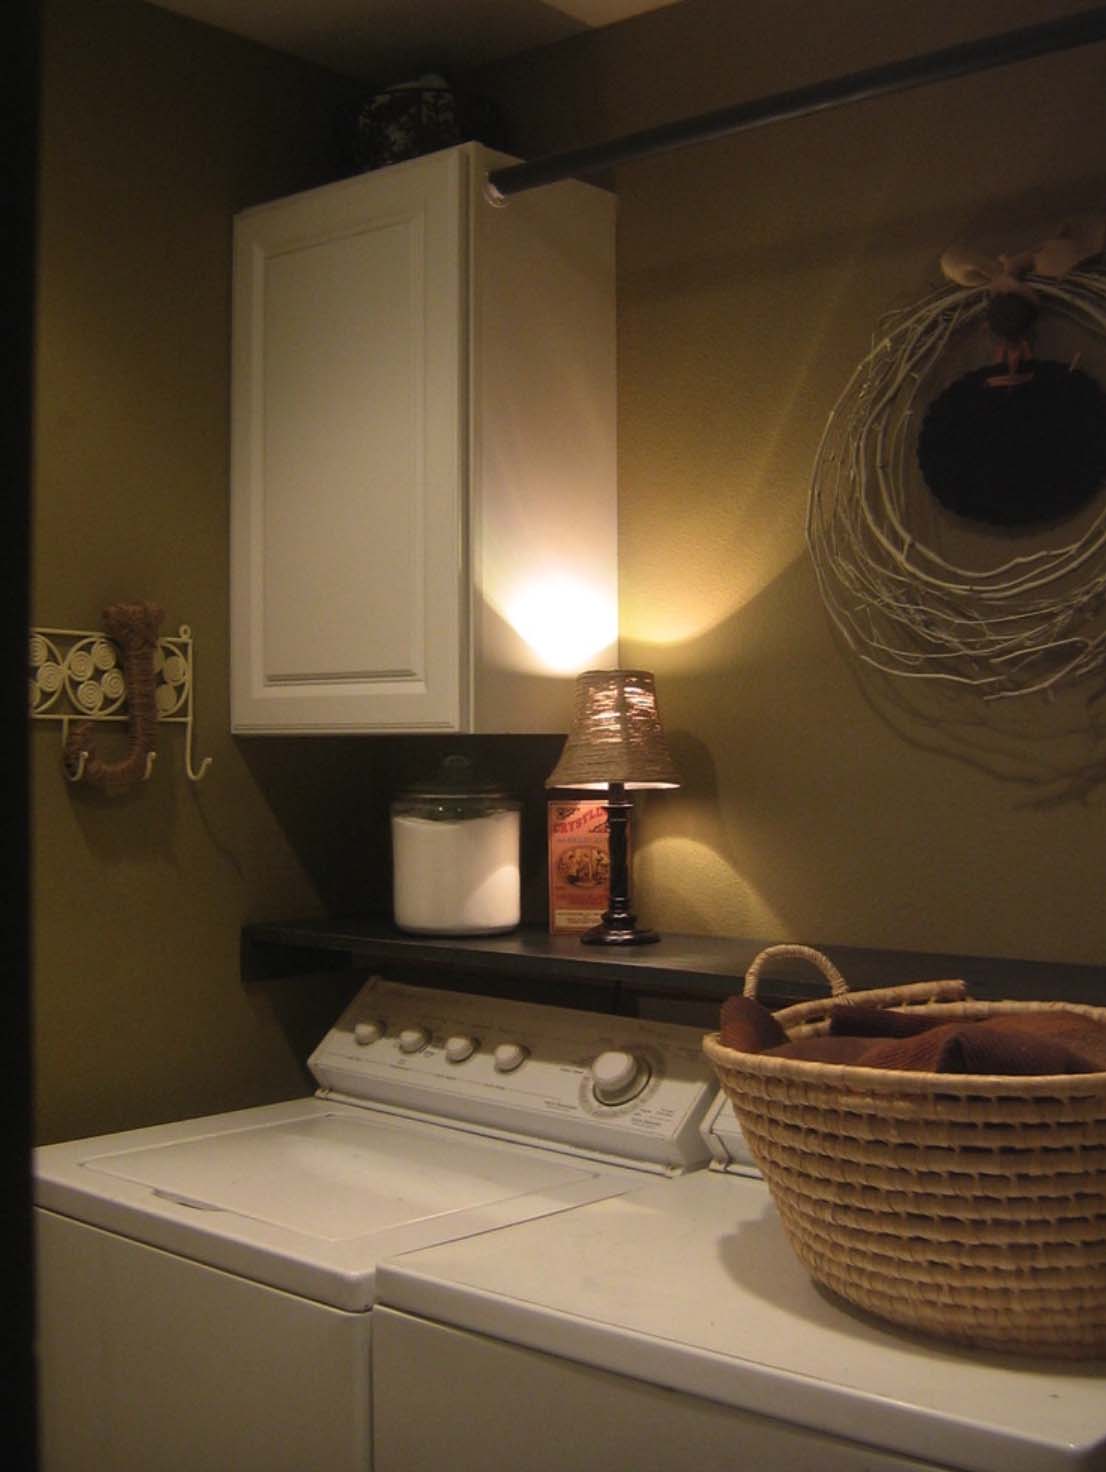 LAUNDRY BASKETS LAUNDRY ROOM HOME DECOR SINGLE LIGHT SWITCH PLATE 